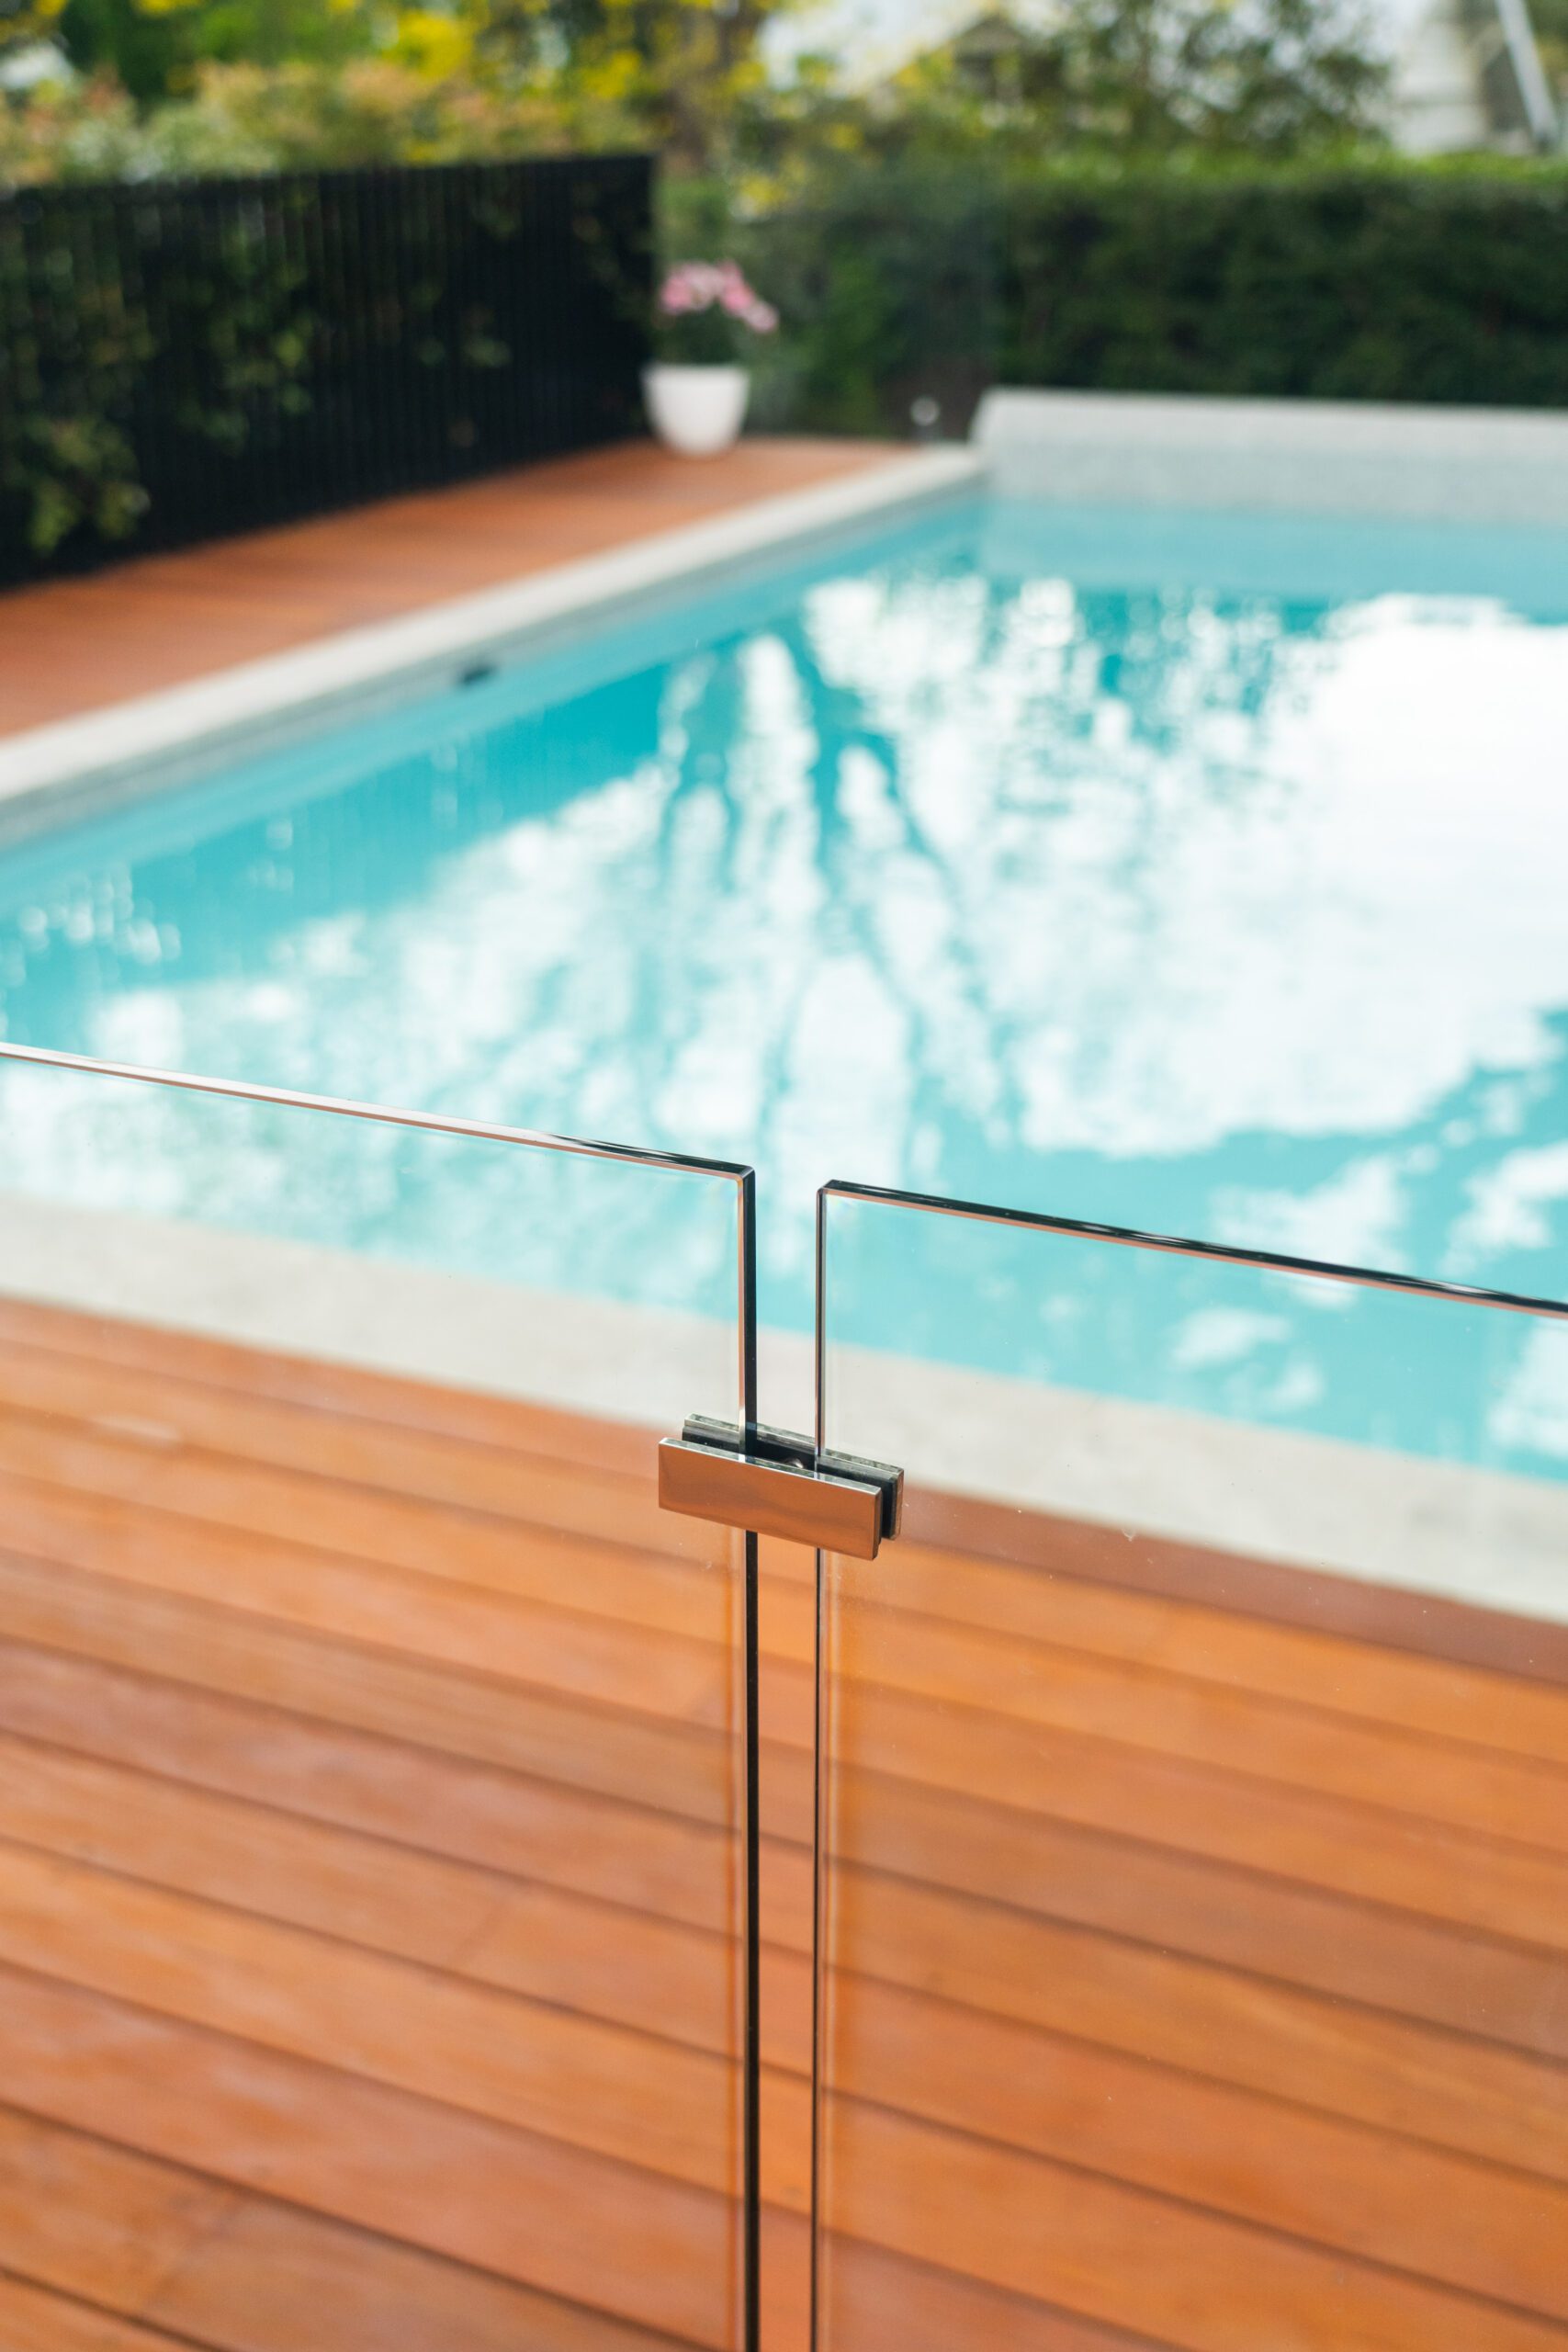 Glass Vice Pool Fencing and Finrail Standard Panel Aluminium Fencing